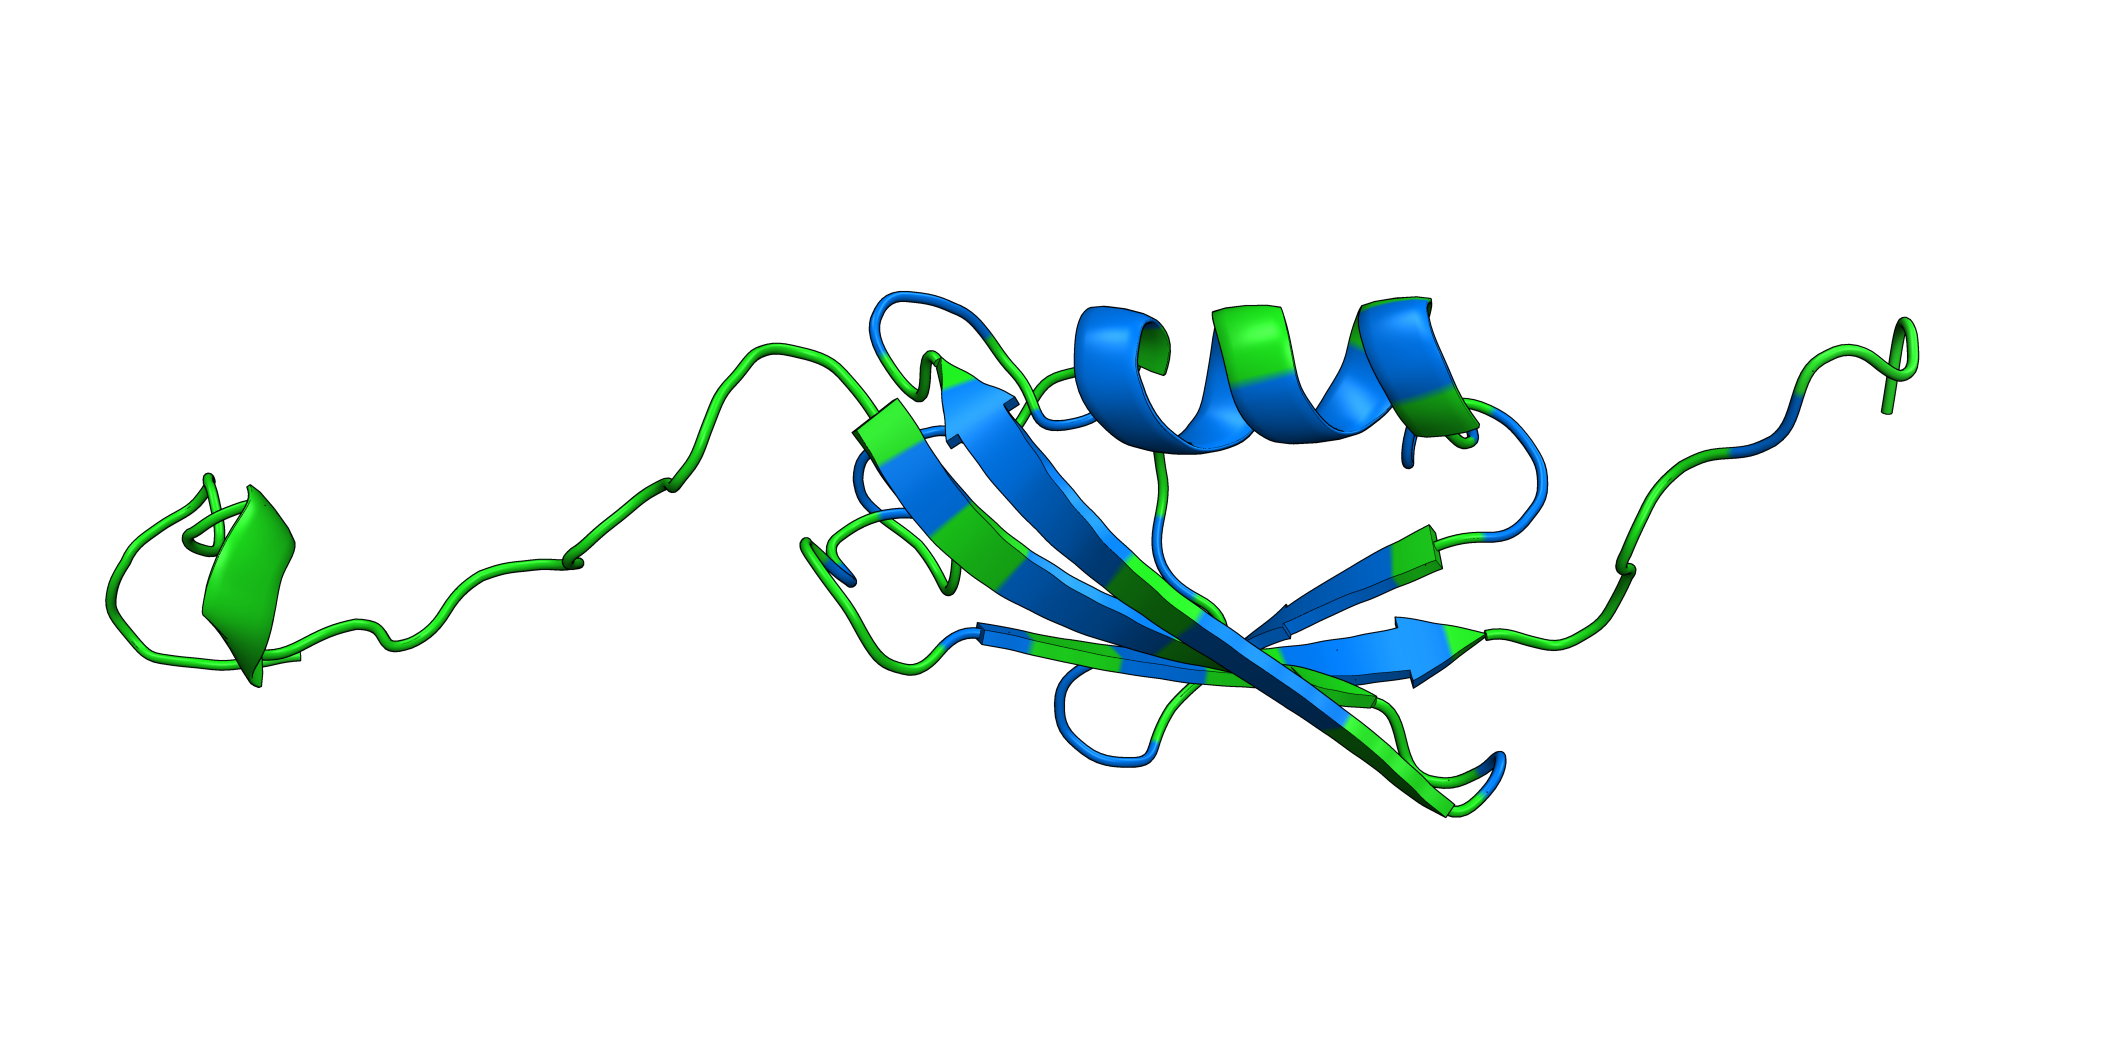 _images/sumo_pymol.png